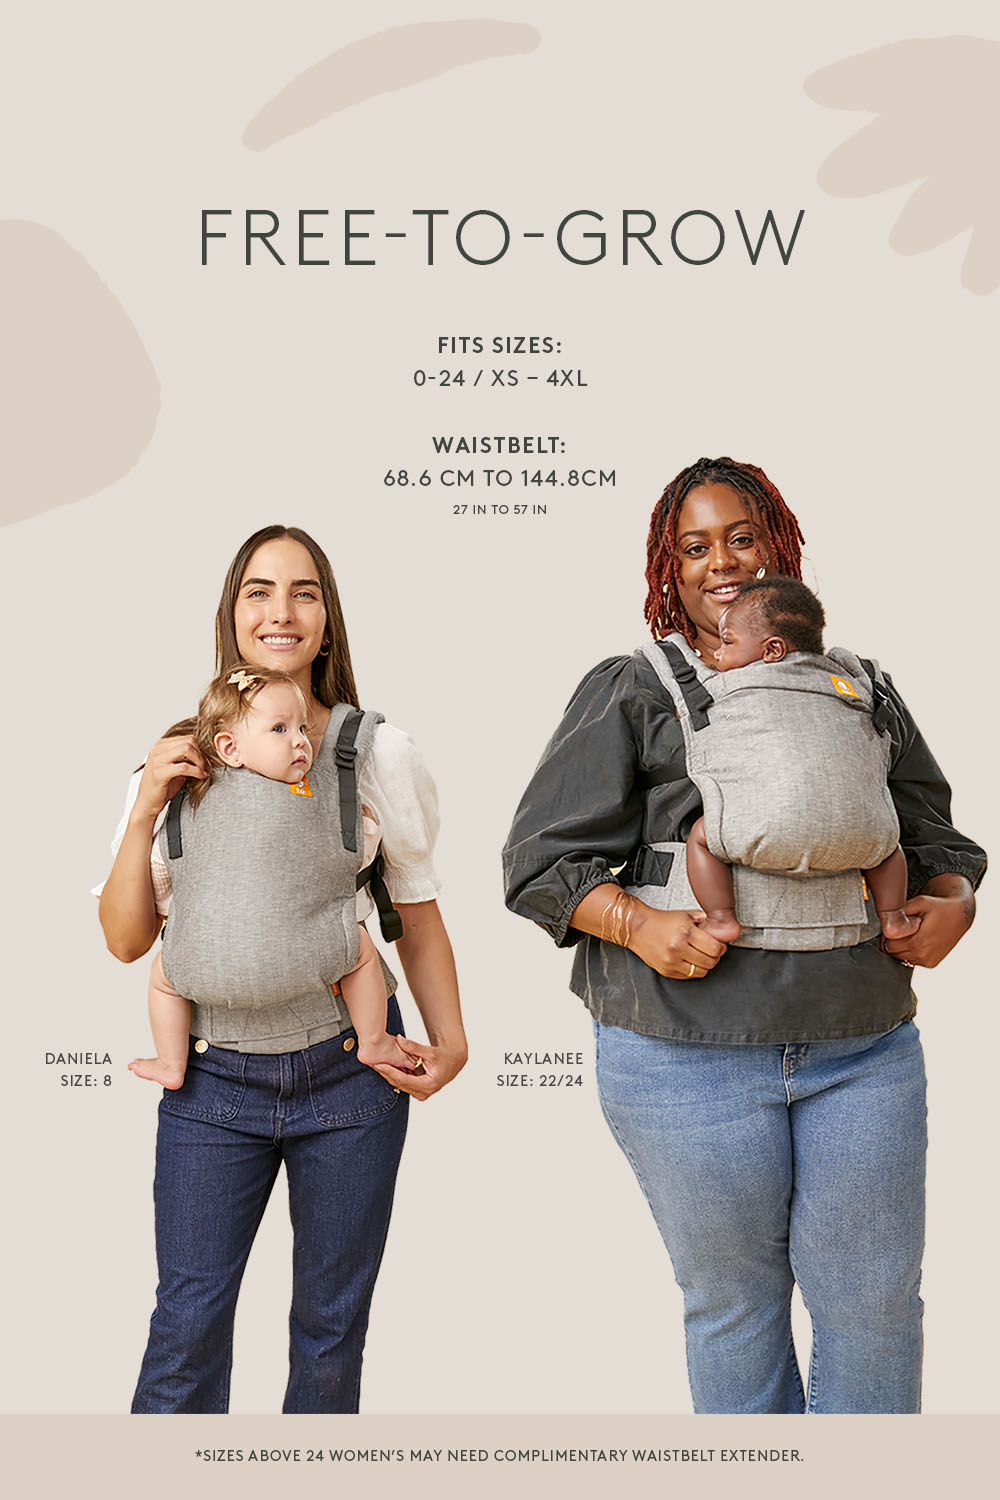 Artisan 243 - Signature Handwoven Free-to-Grow Baby Carrier